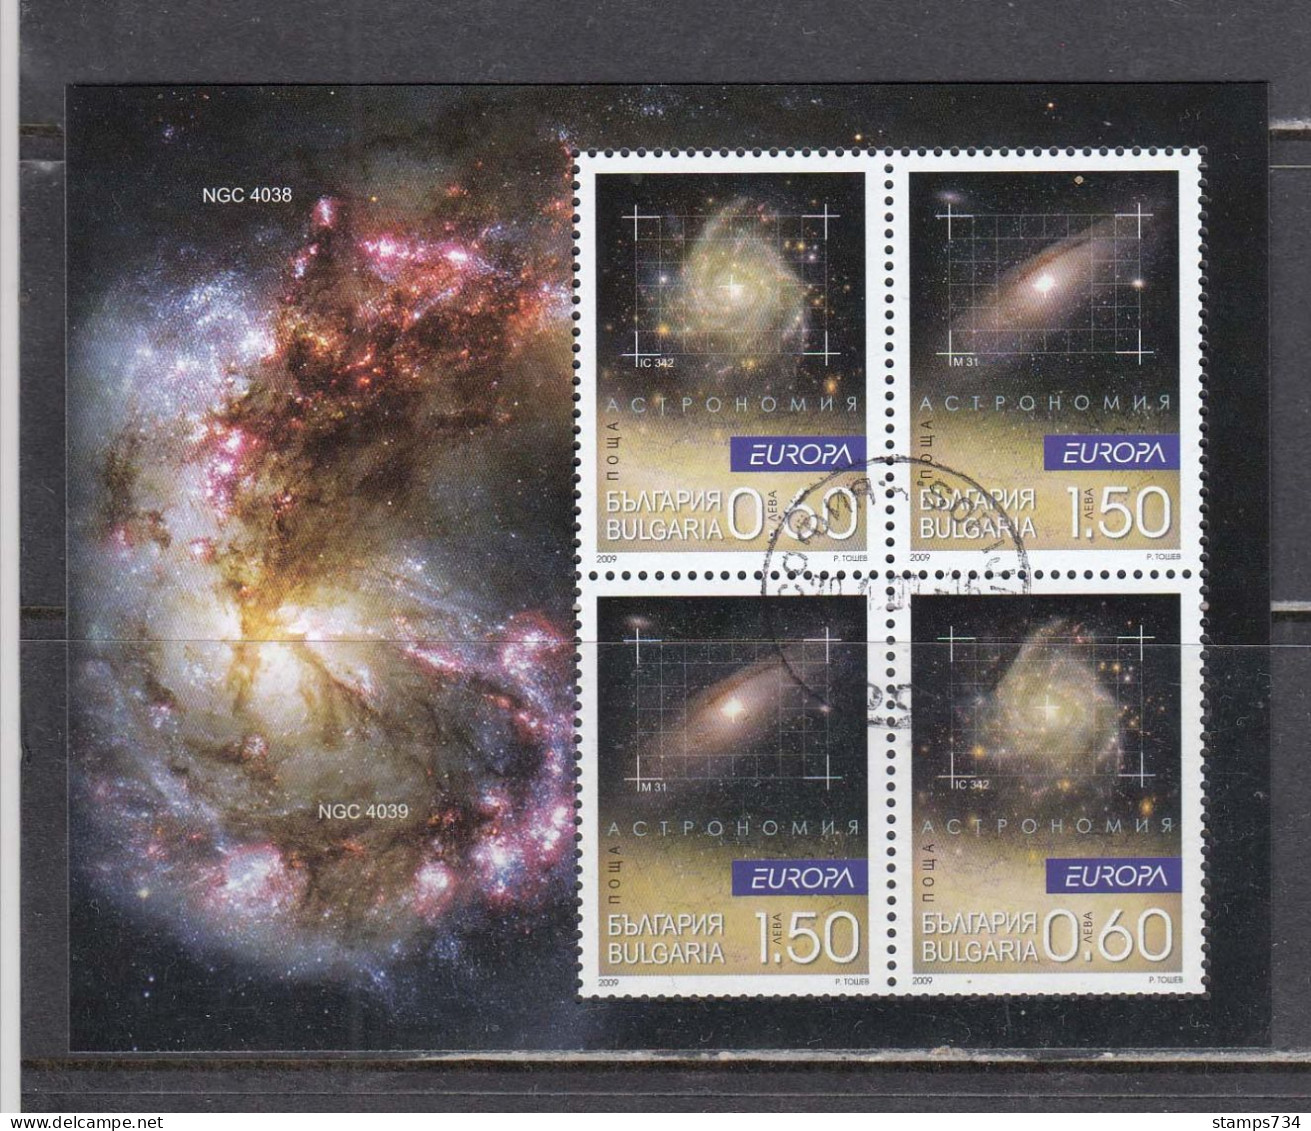 Bulgaria 2009 - EUROPA: Astronomy, Mi-Nr. Bl. 315, Used - Used Stamps